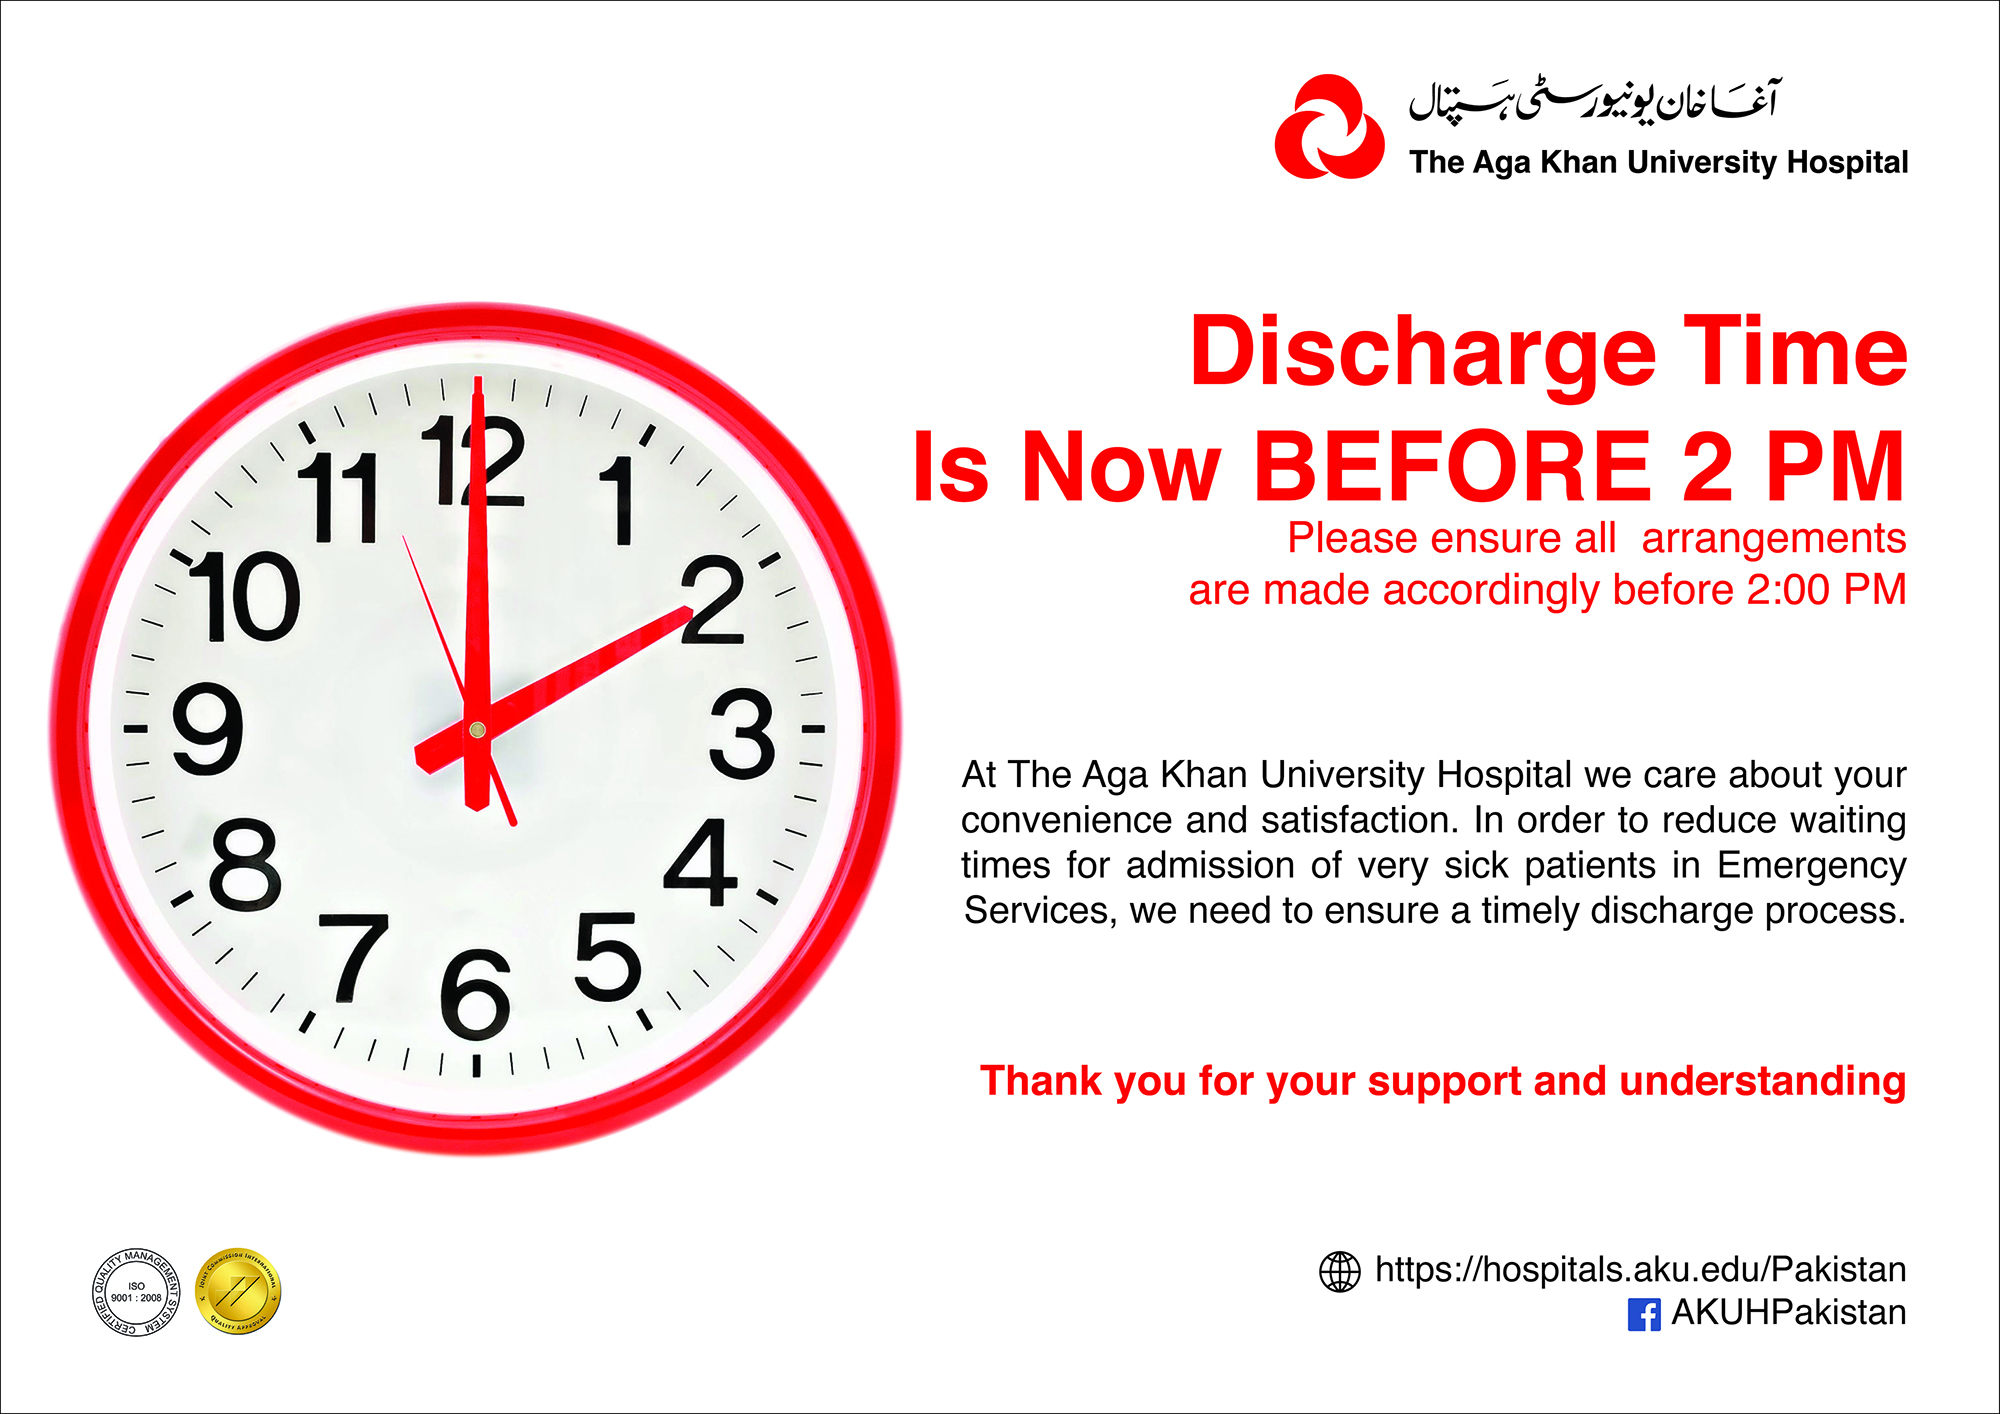 New Patient Discharge Poster (English) v(1) 27 Jan 2017-01.jpg